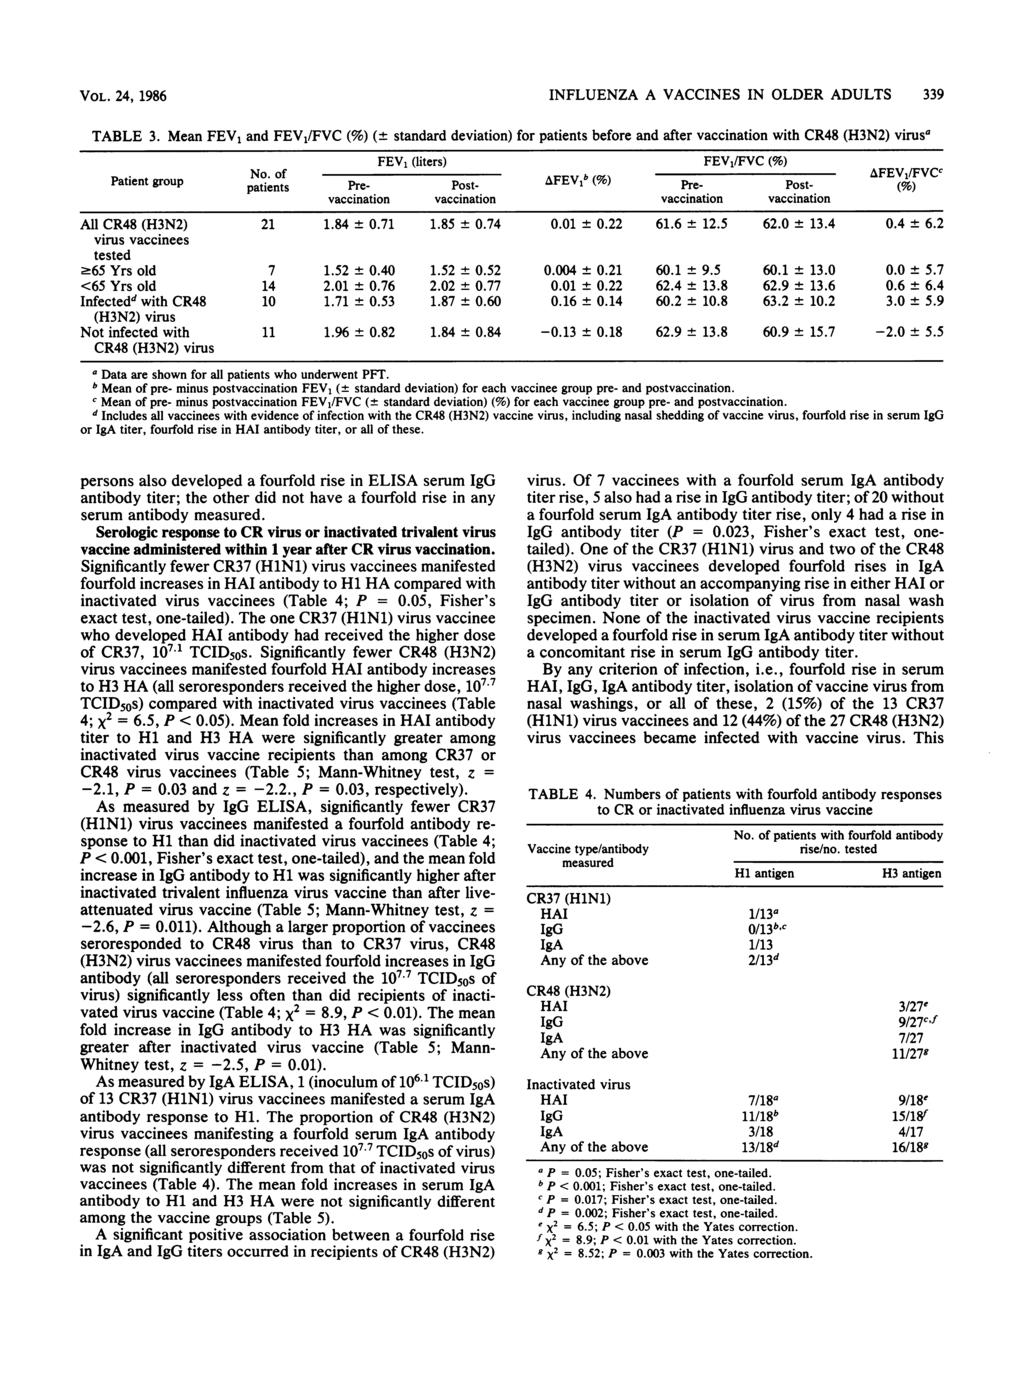 VOL. 24, 1986 INFLUENZA A VACCINES IN OLDER ADULTS 339 TABLE 3.